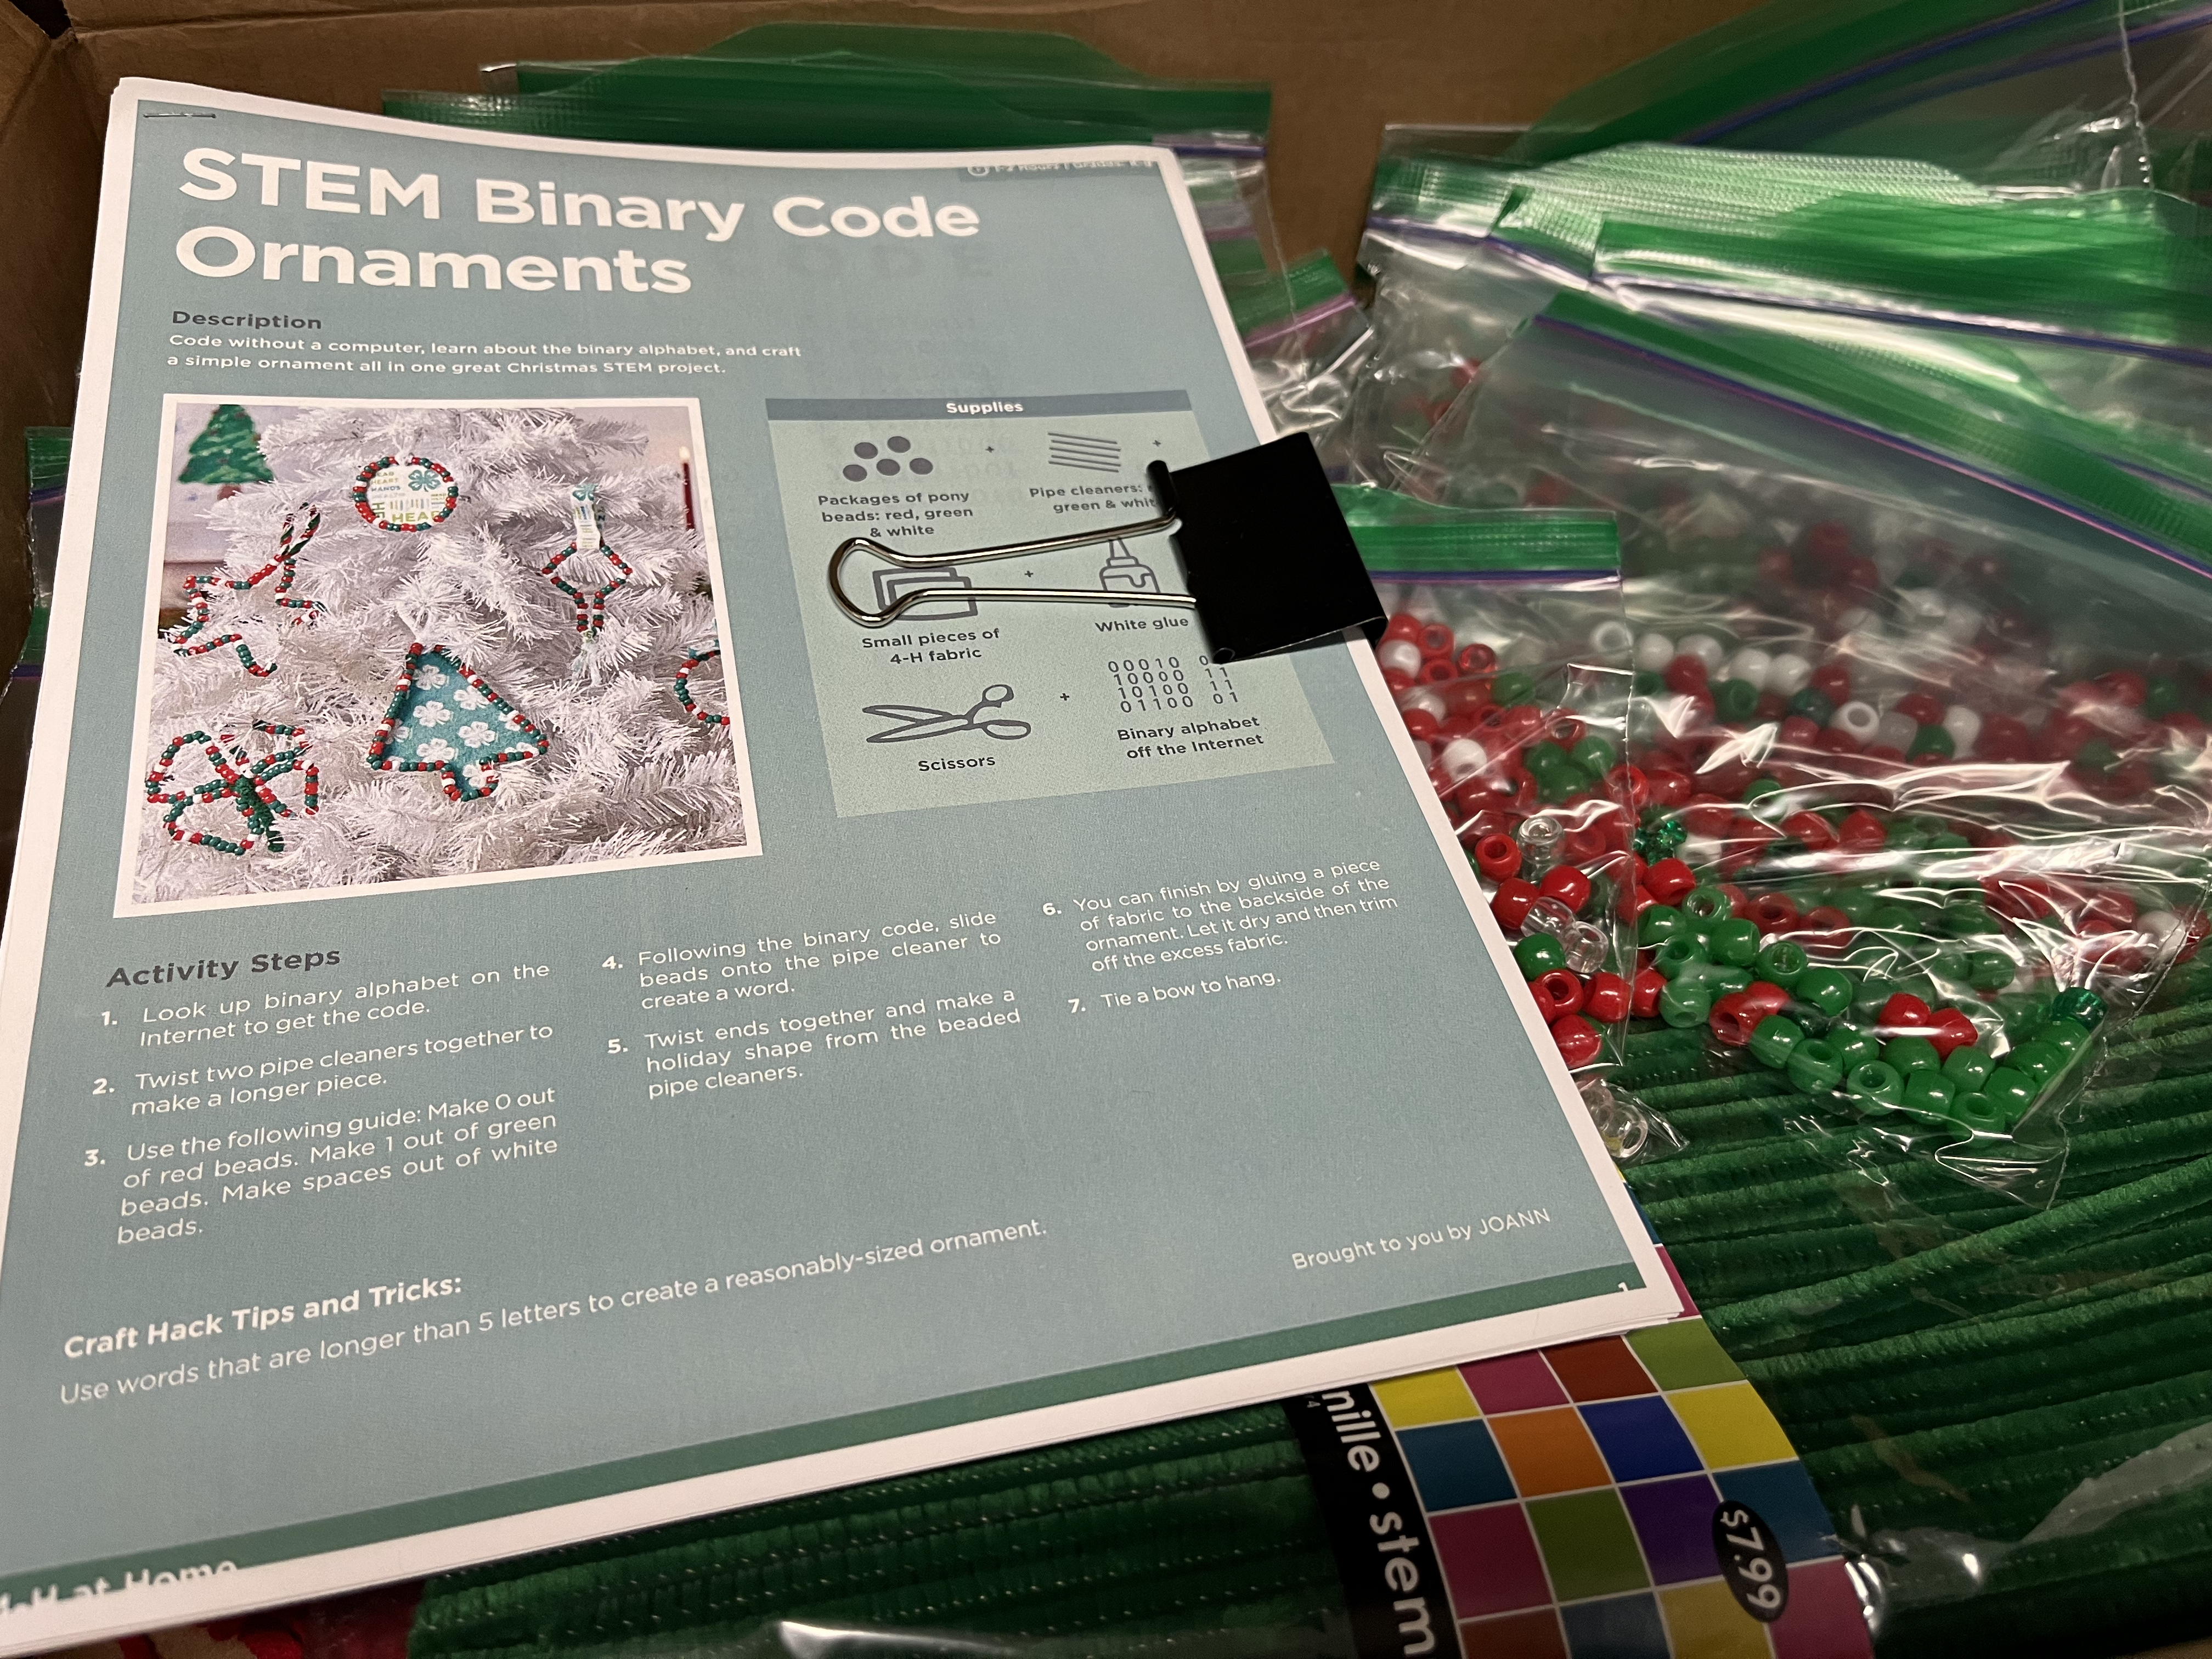 Making binary code ornaments teaches youth about computer science. Ornament activity kits are available for pick at the N.C. Cooperative Extension office below the library in Lenoir.